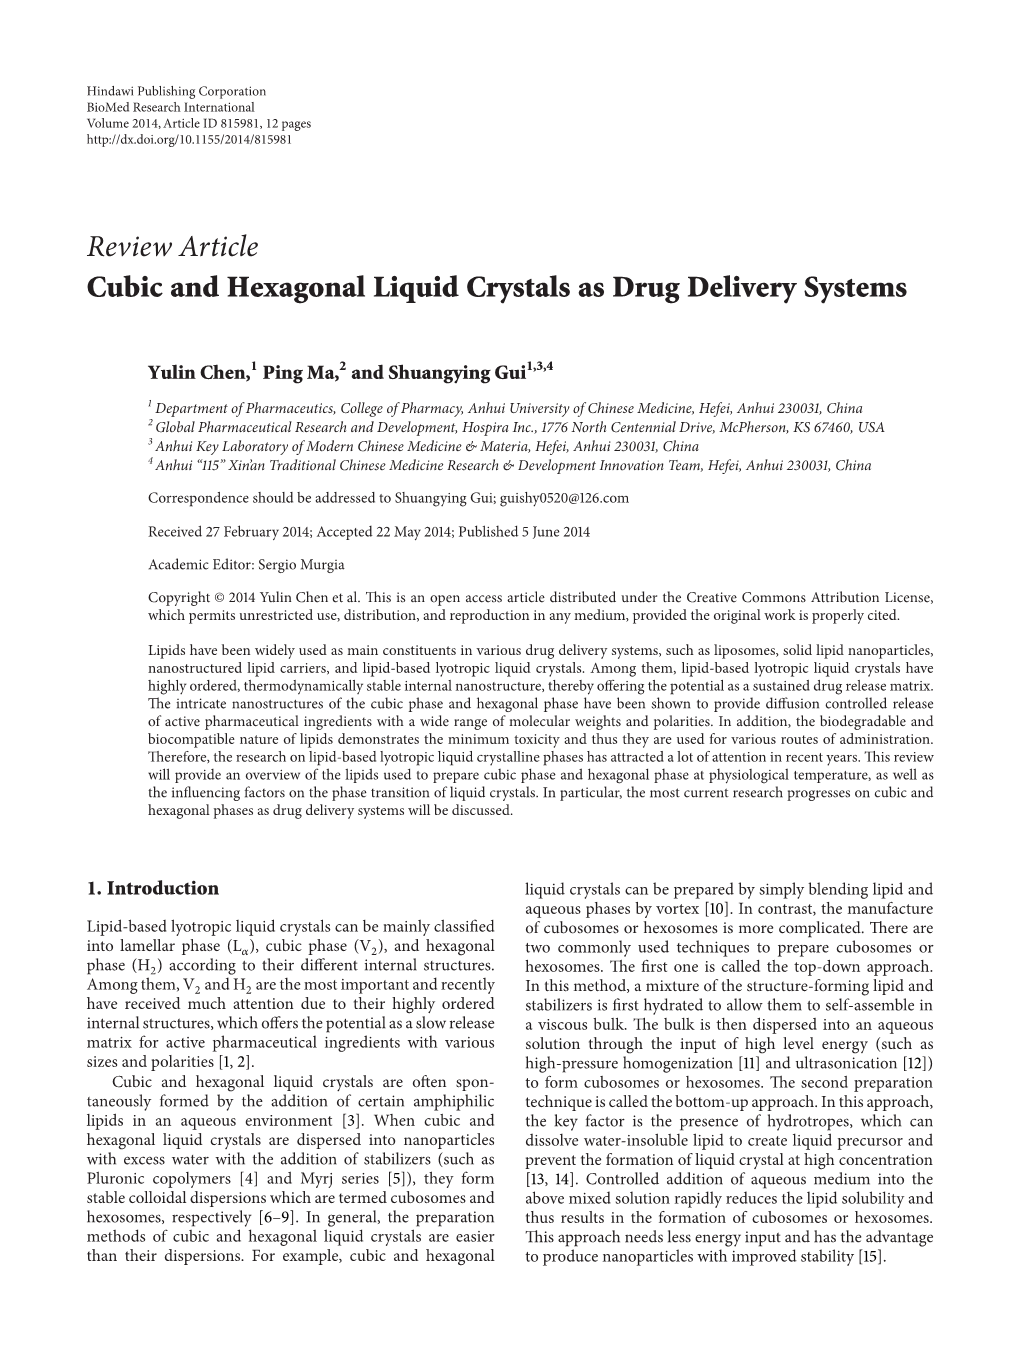 Review Article Cubic and Hexagonal Liquid Crystals As Drug Delivery Systems